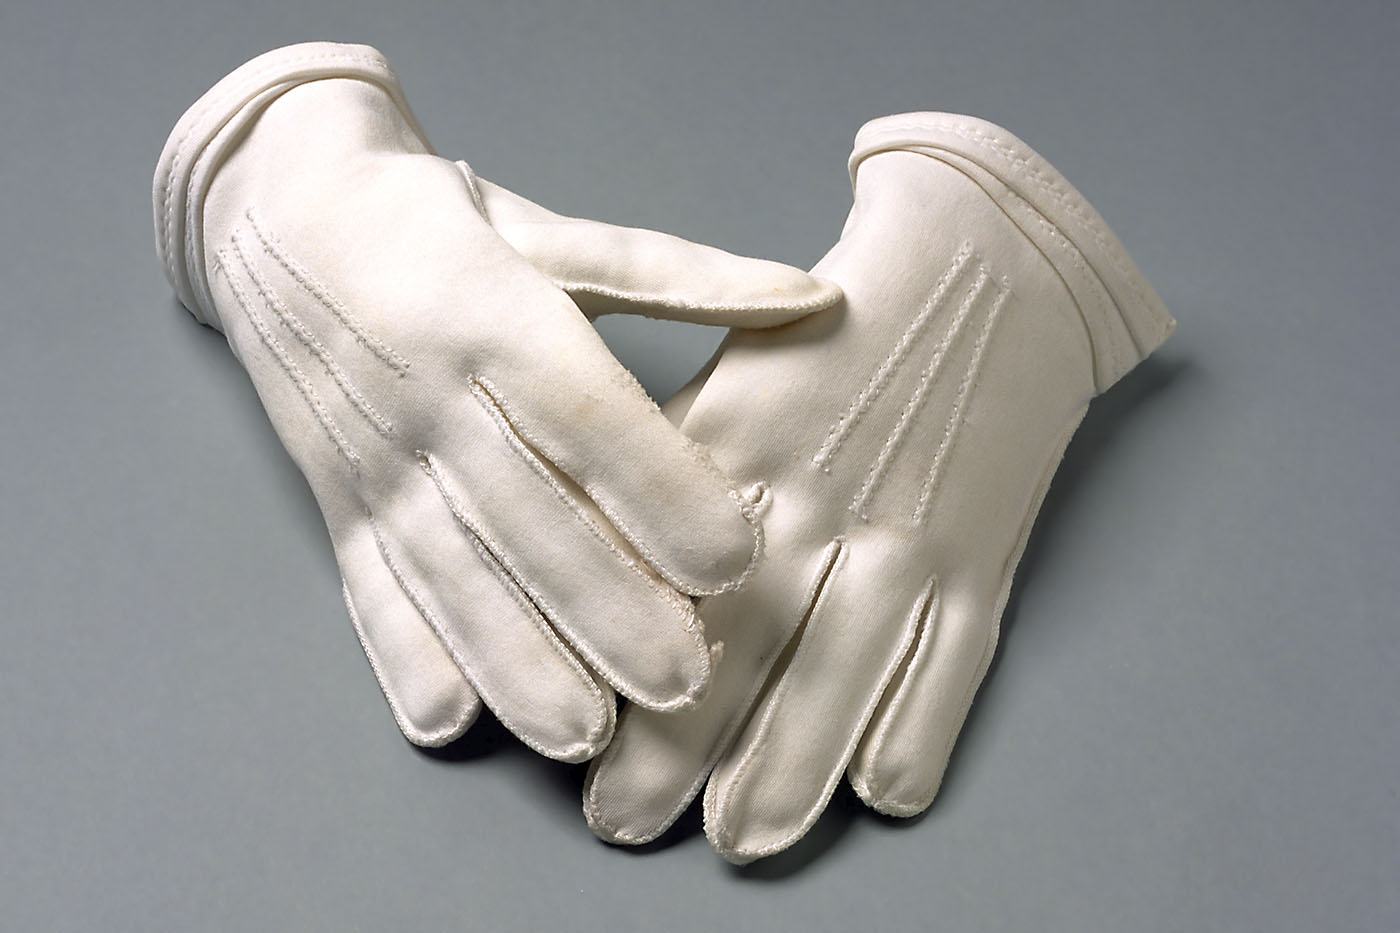 A pair of white gloves.